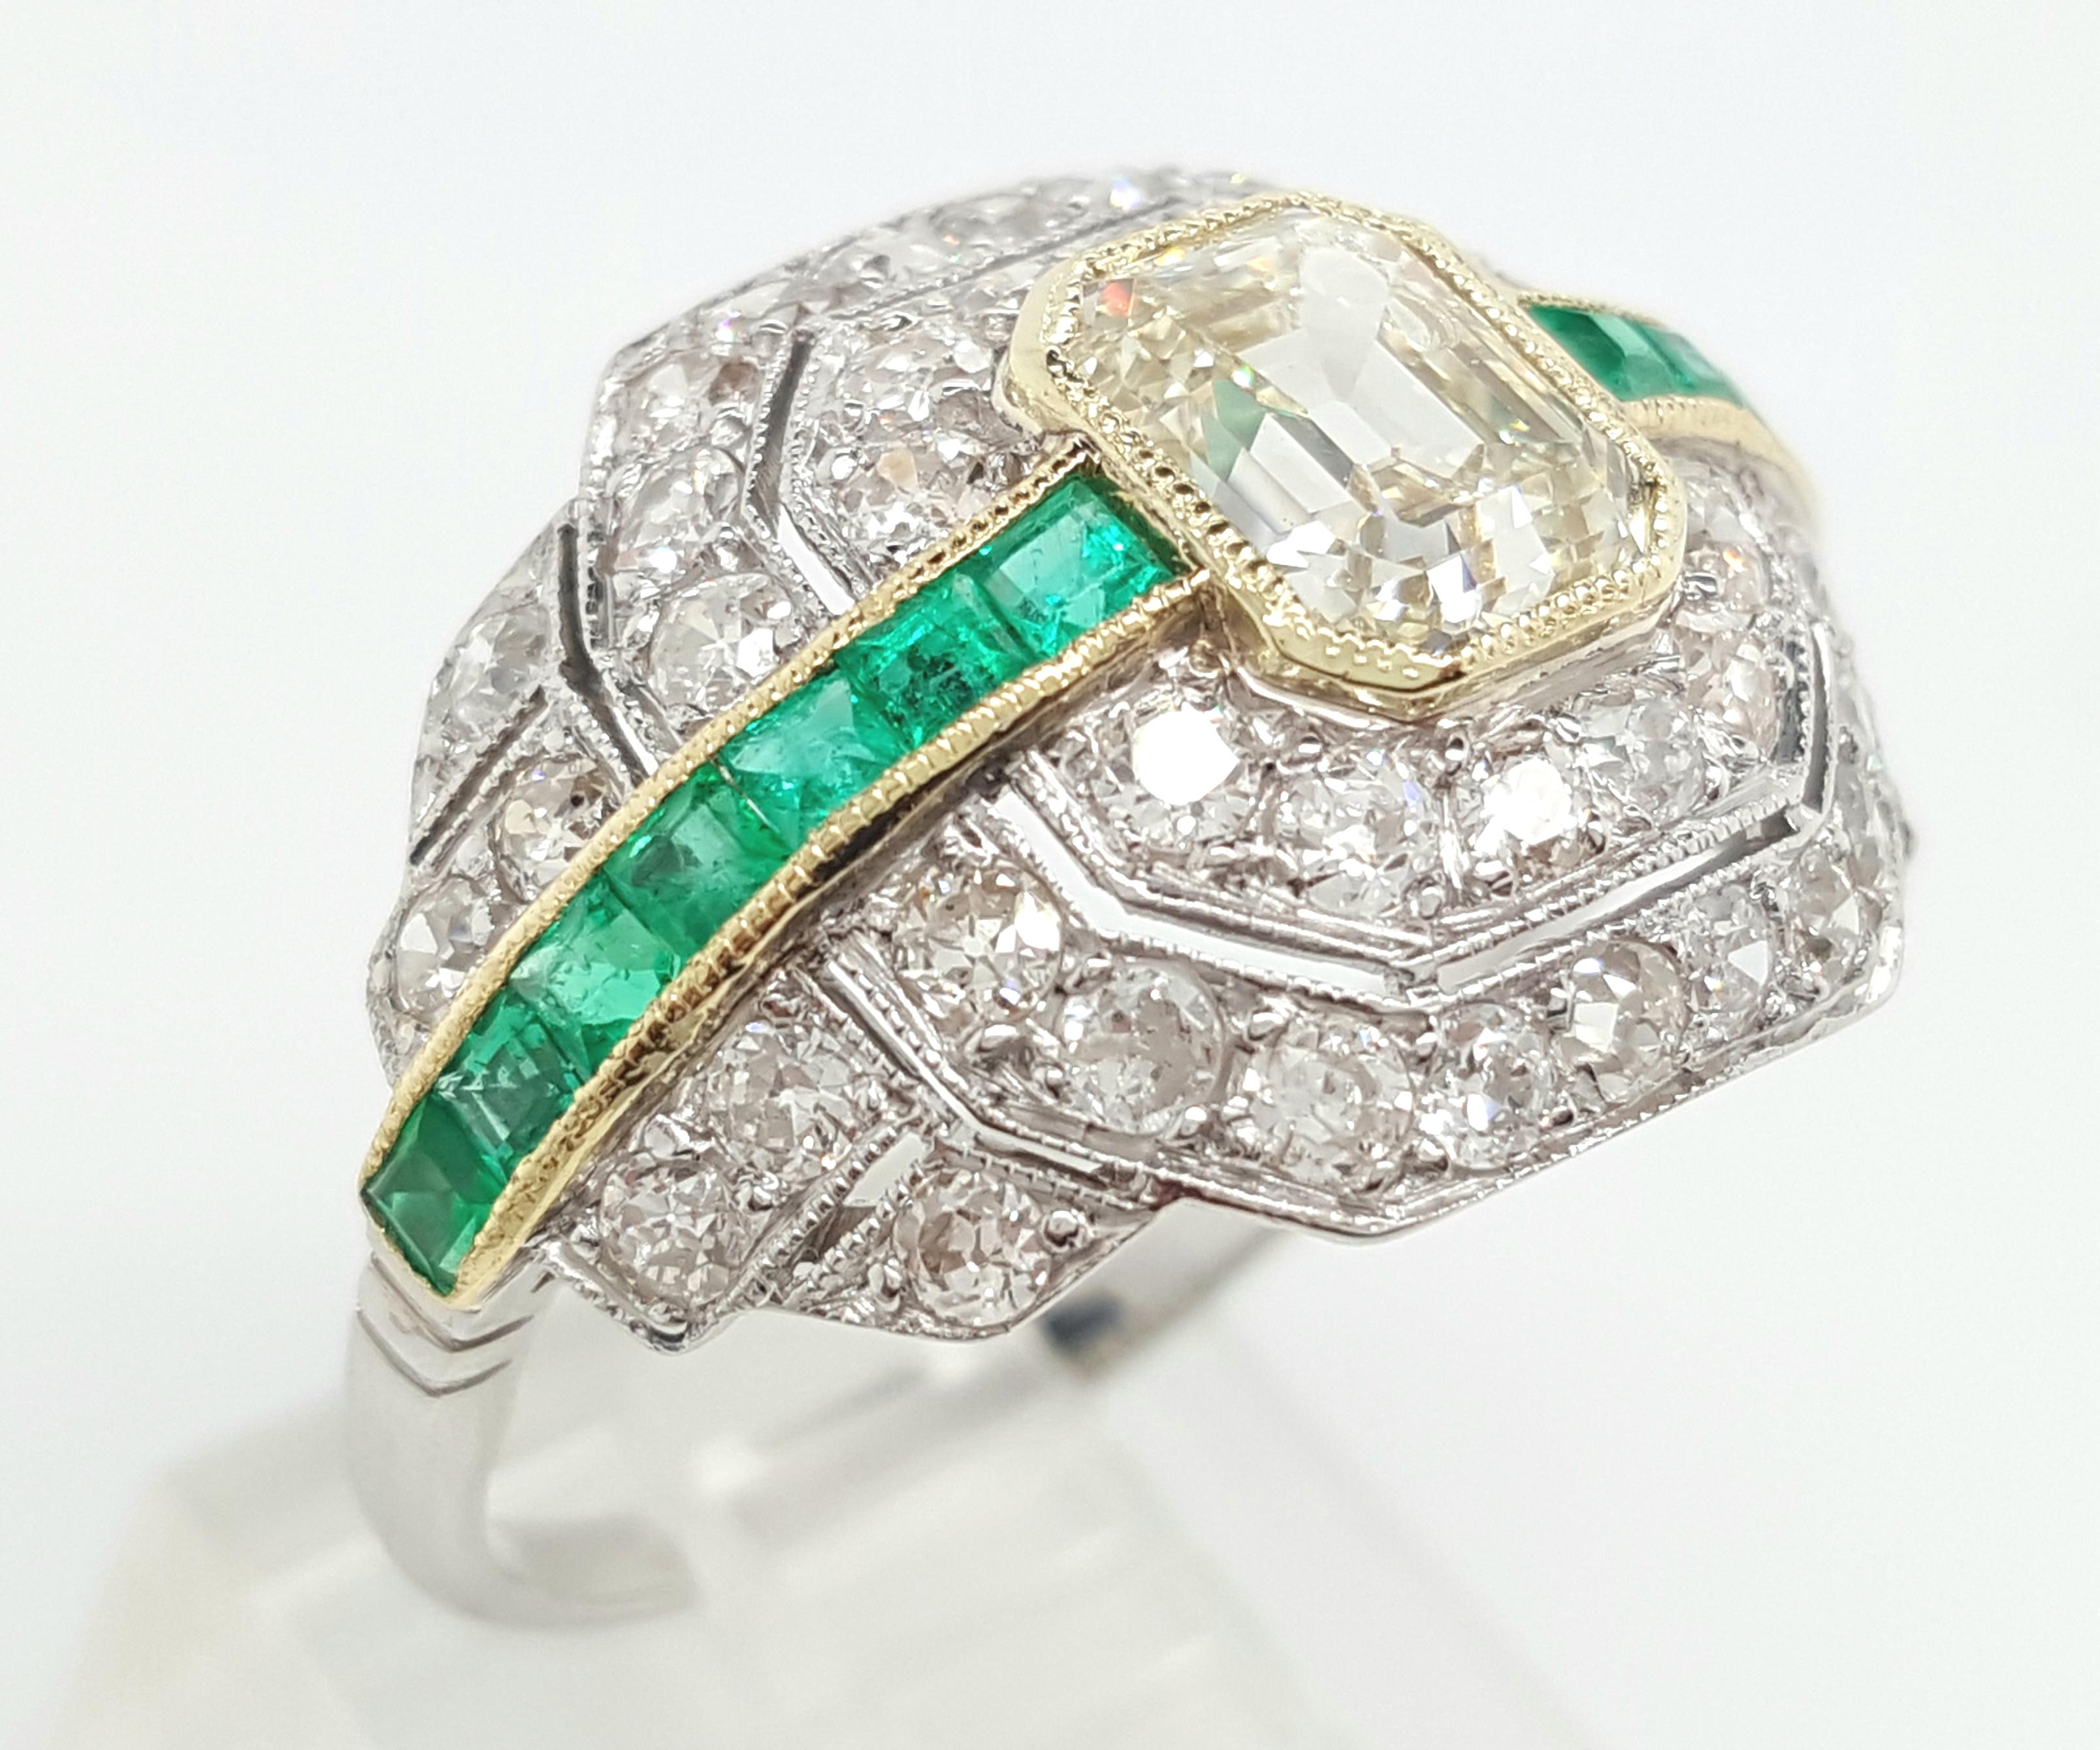 This fine Art Deco ring is a true treasure kept in excellent condition. The ring is an example of pure excellance and its unique design is one of a kind. The center is a stunning 1.24 carat emerald cut diamond and it is bezel set with a delicate